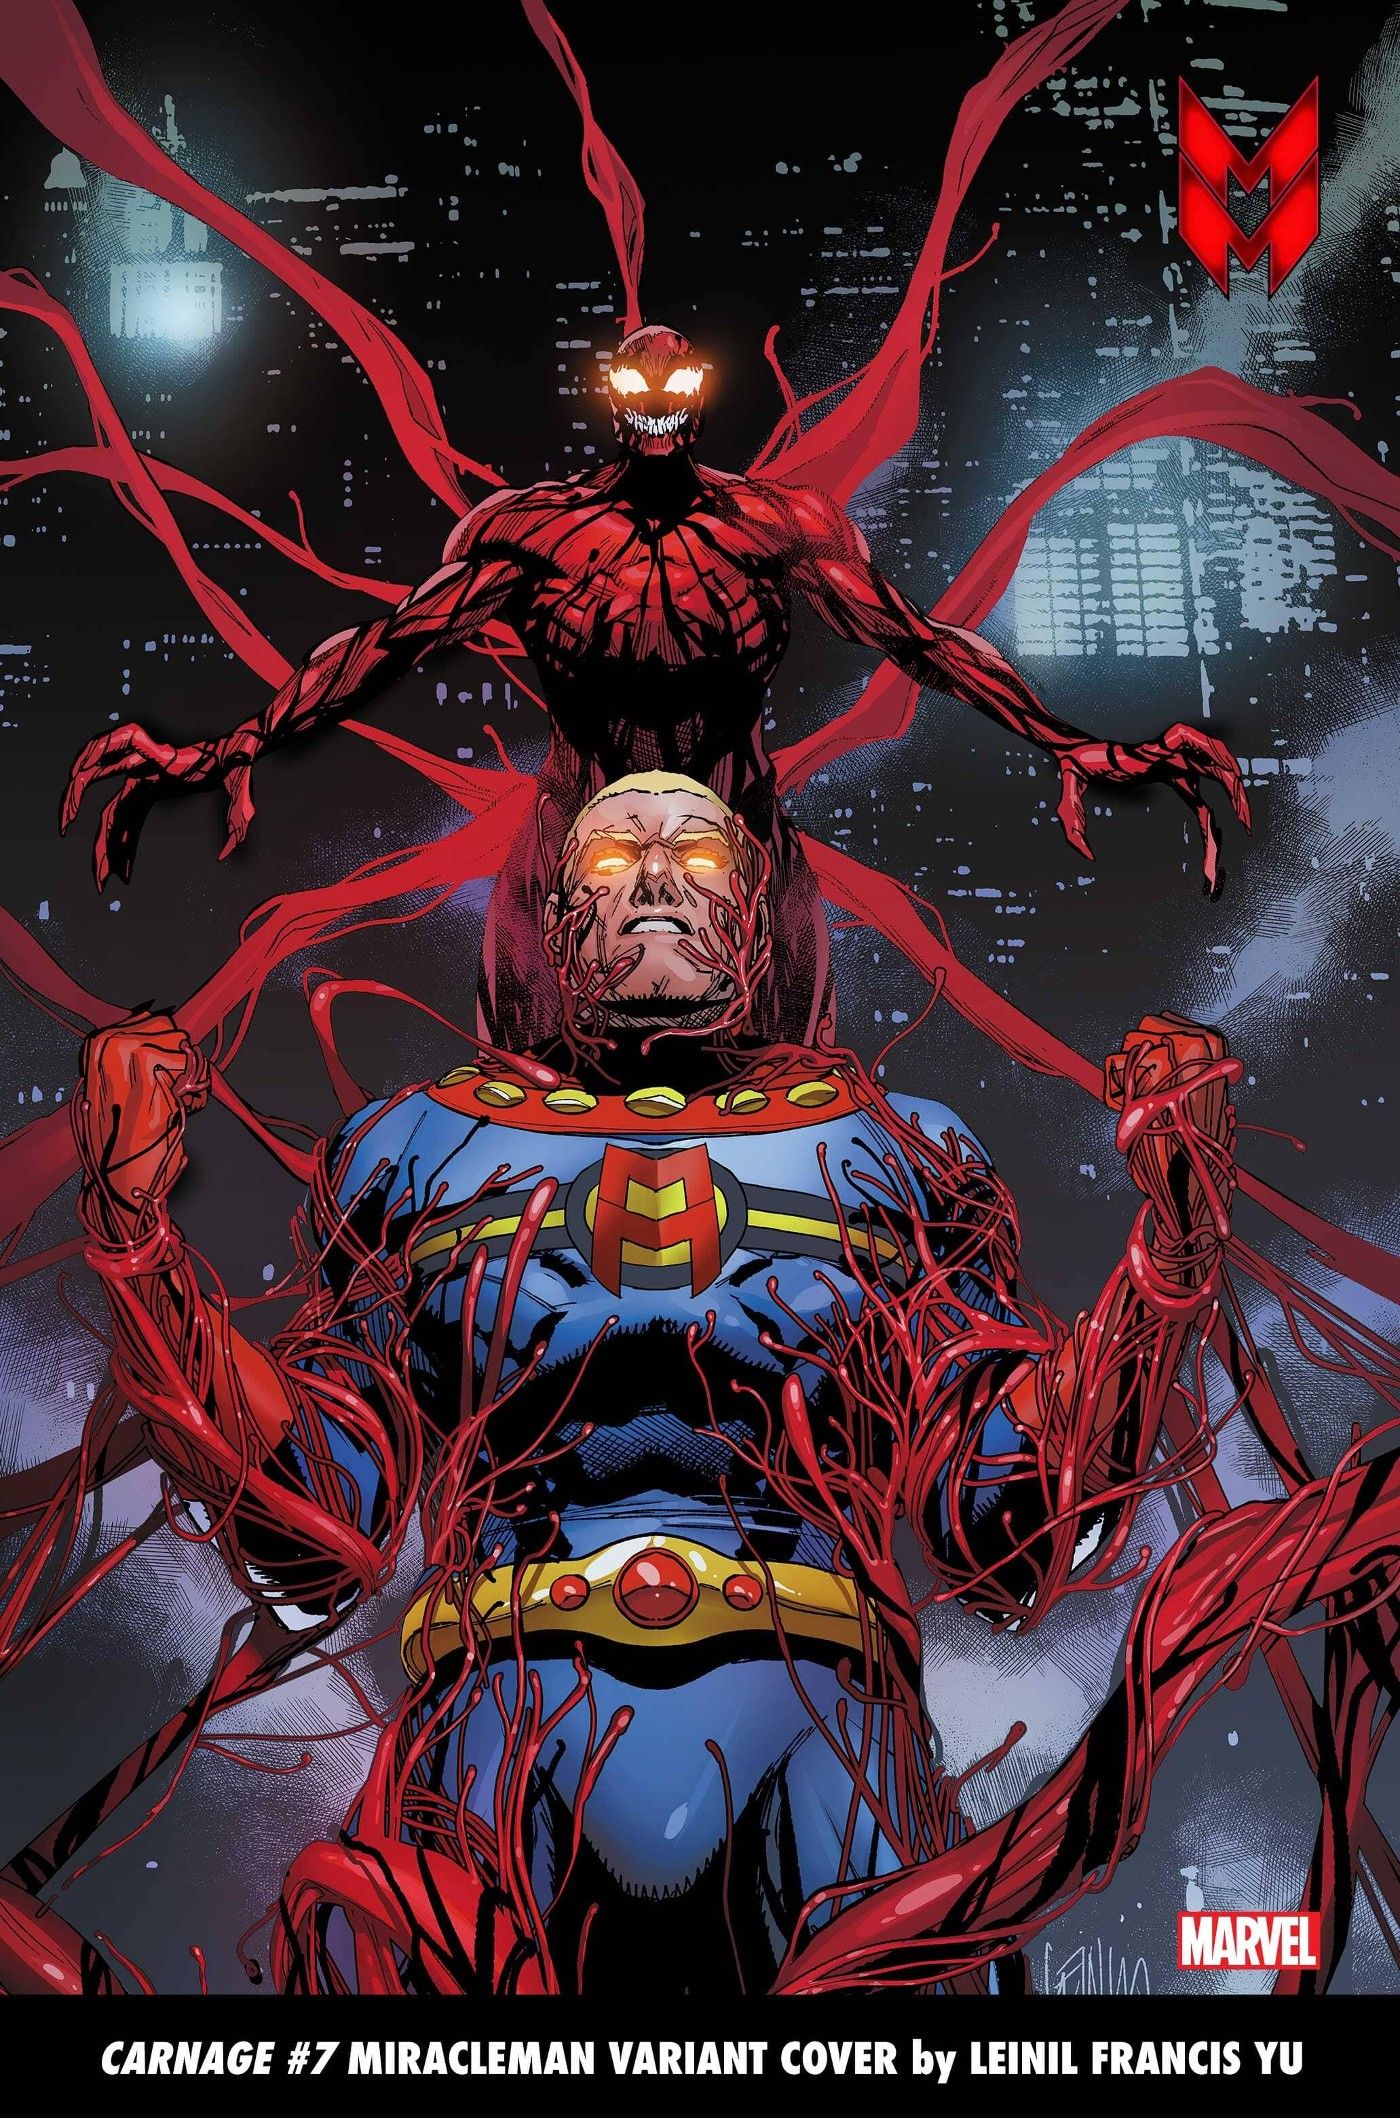 CARNAGE 7 MIRACLEMAN VARIANT COVER by LEINIL FRANCIS YU